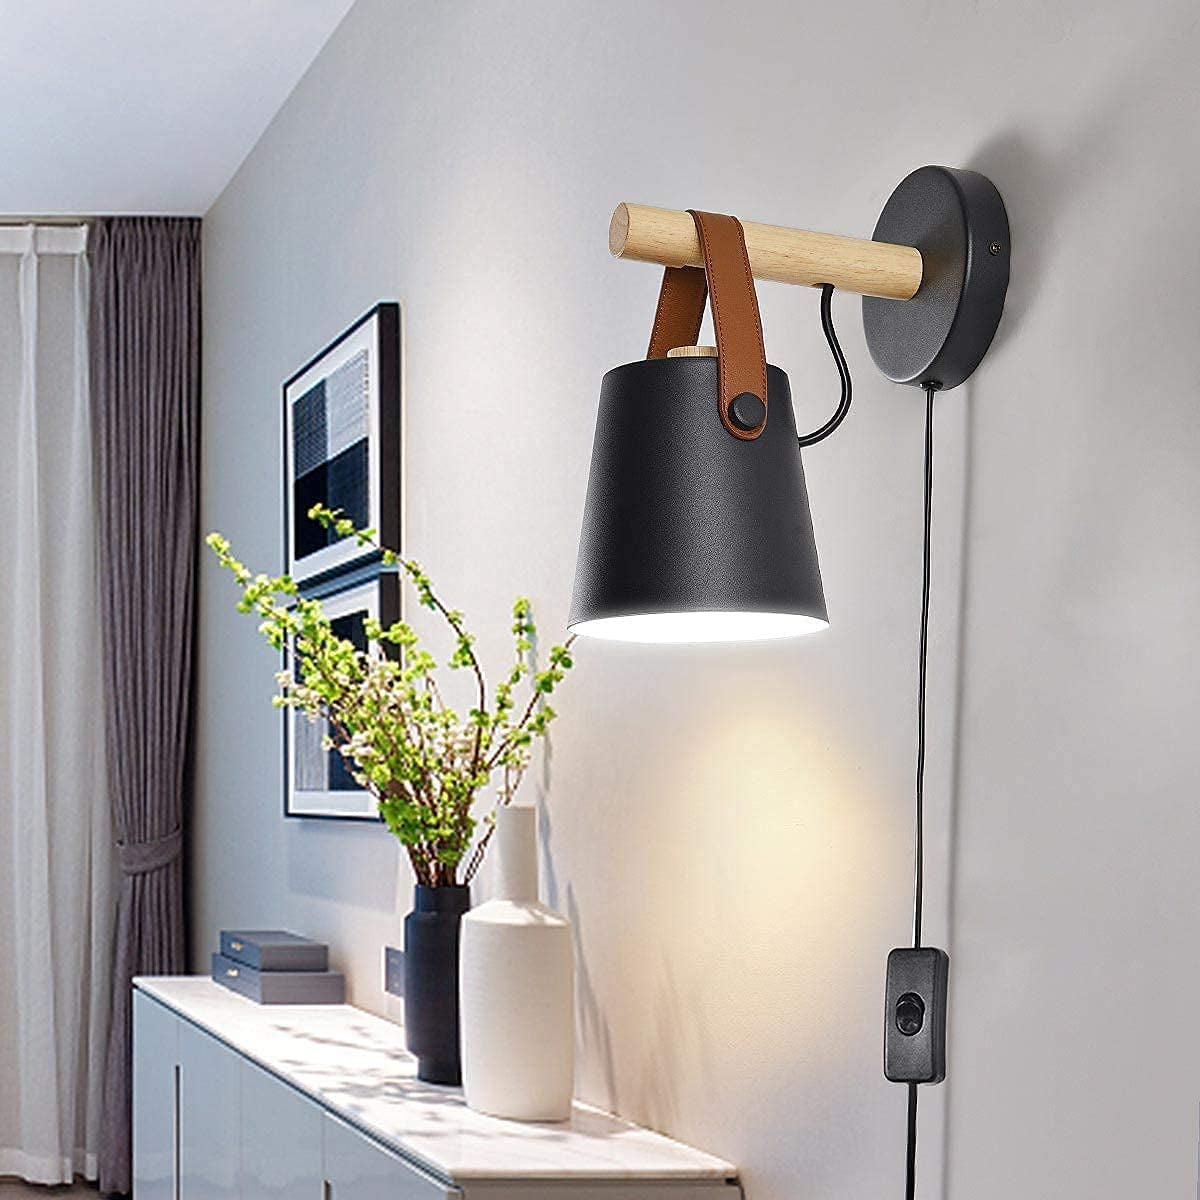 Wall Lamps for Bedroom Set of 2 Indoor Plug in Wall Sconces Black Modern Wooden Sconces Wall Lighting Fixture E26 Base for Nightstand or Farmhouse Aisle Corridor